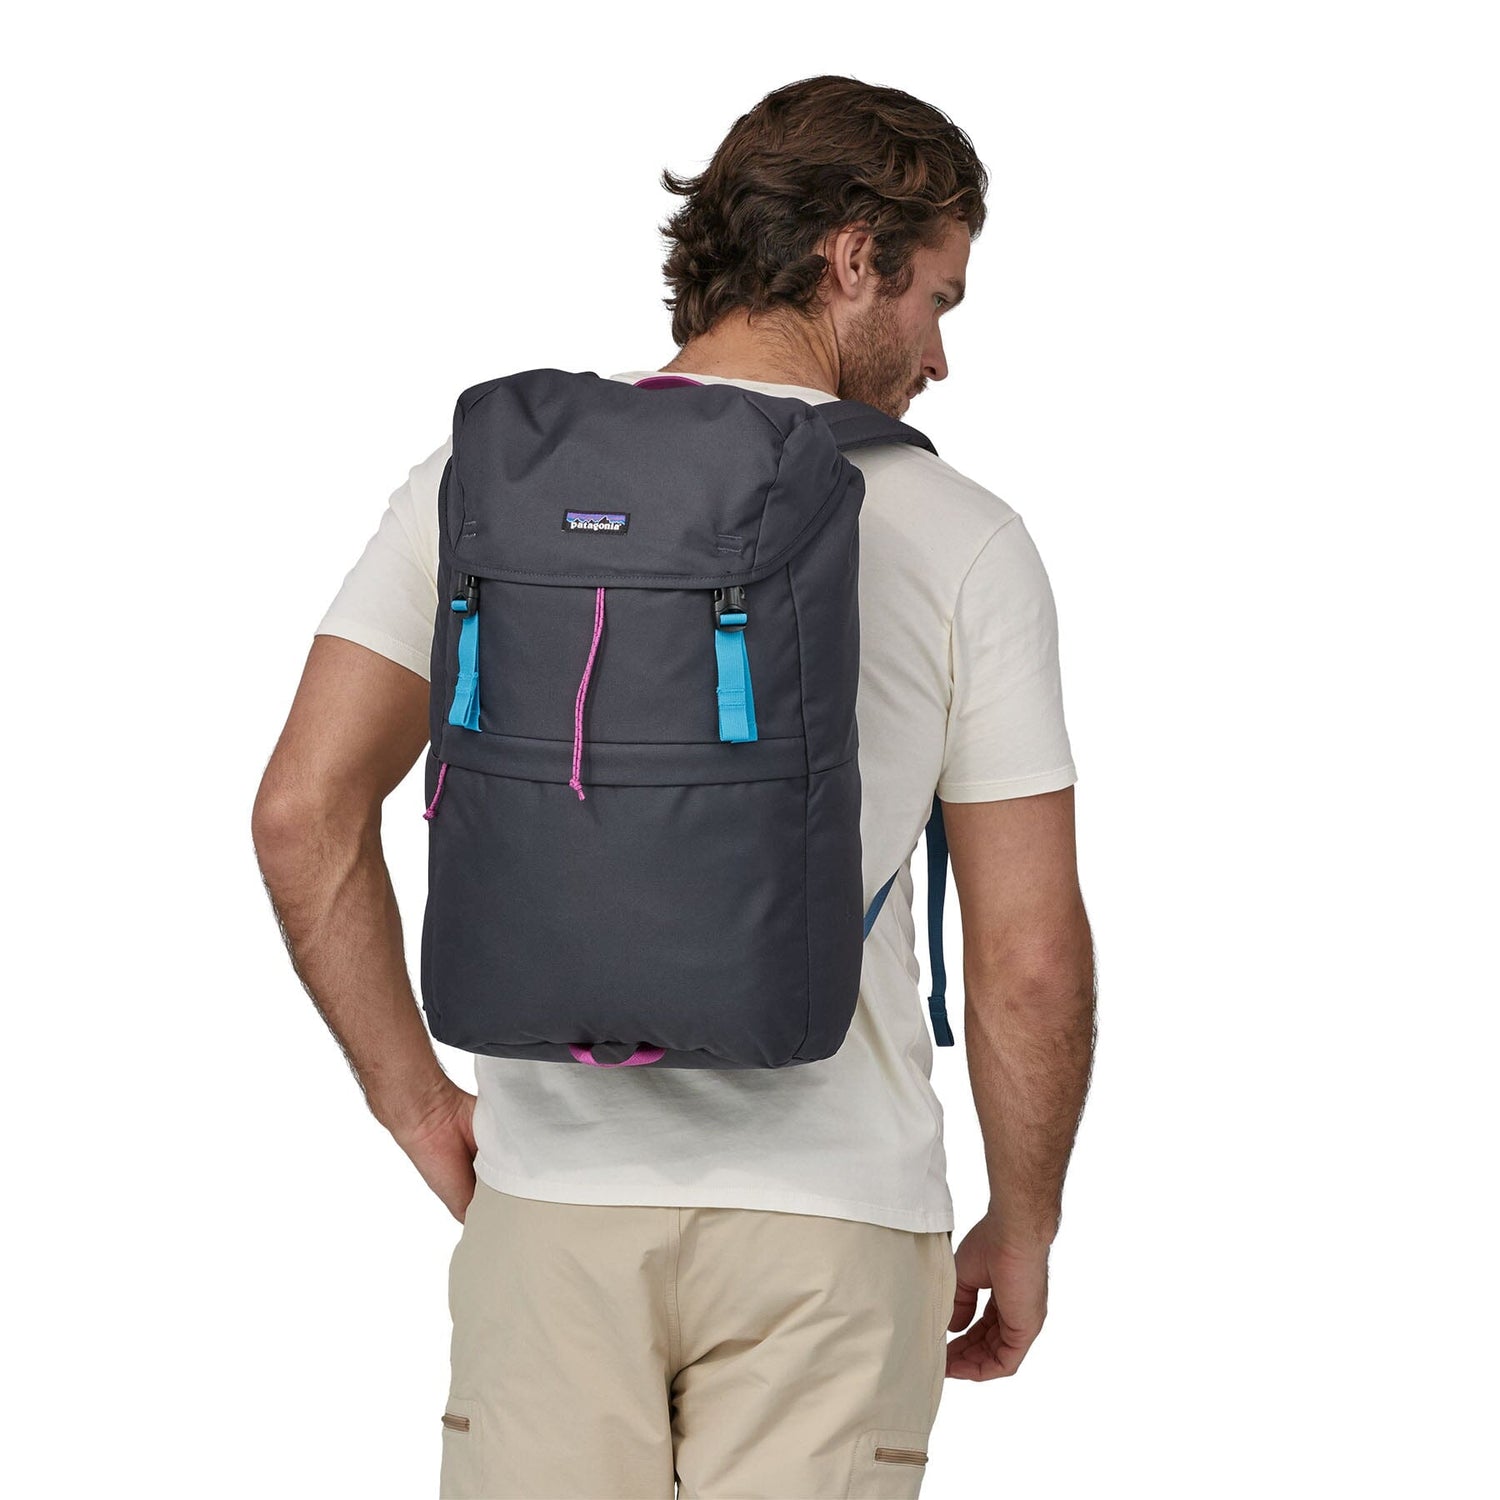 Patagonia - Fieldsmith Lid Pack 28l - Recycled Polyester & Recycled Nylon - Weekendbee - sustainable sportswear